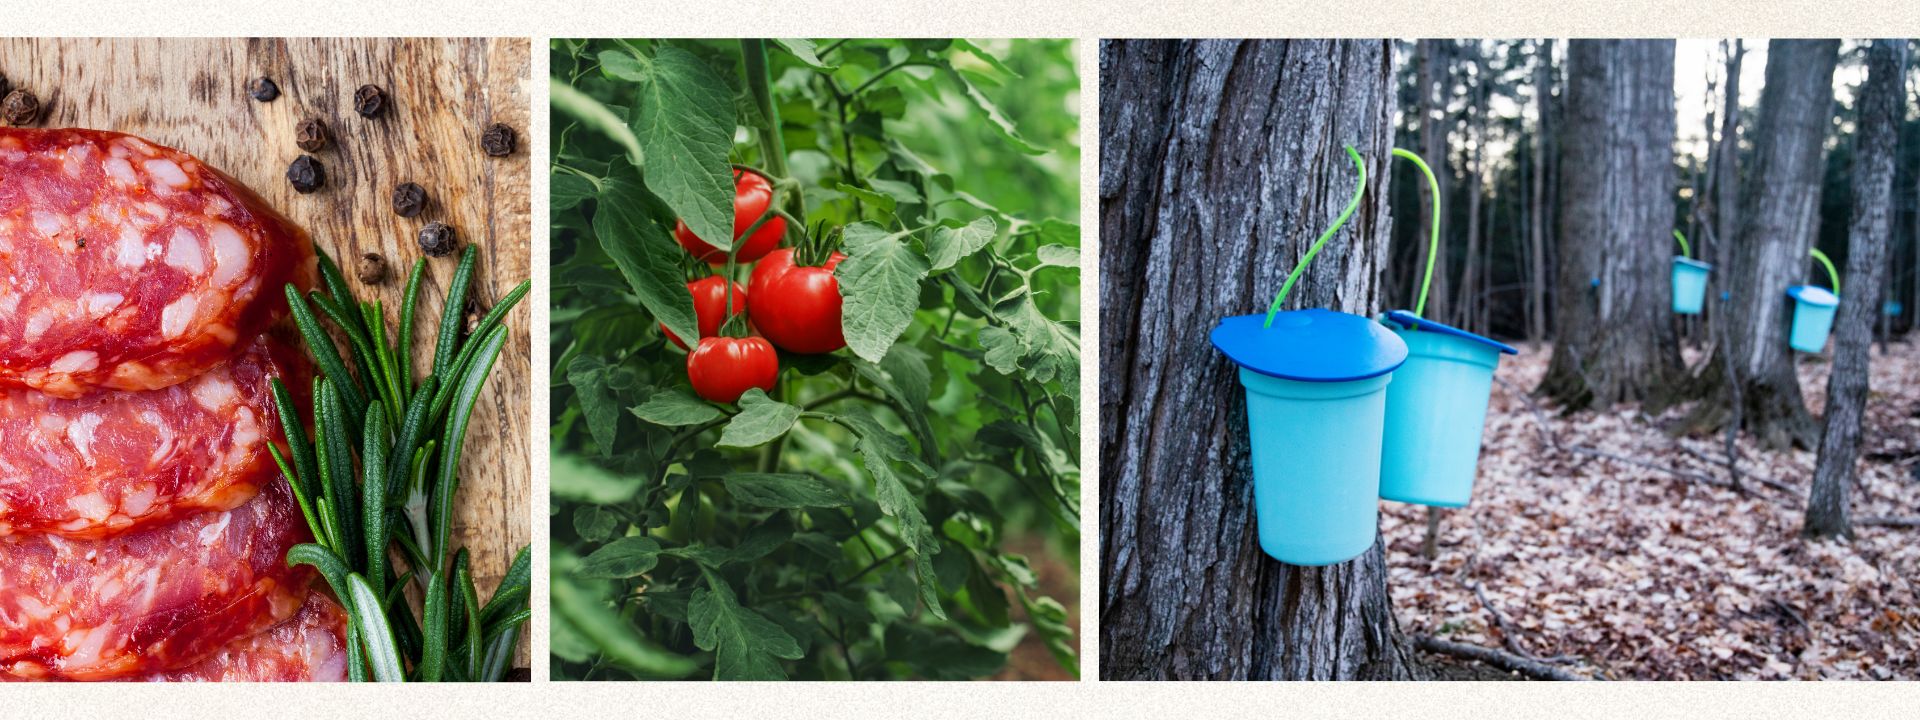 cured meat with rosemary and black pepper, cherry tomatoes on the vine, blue sap collection buckets on maple trees